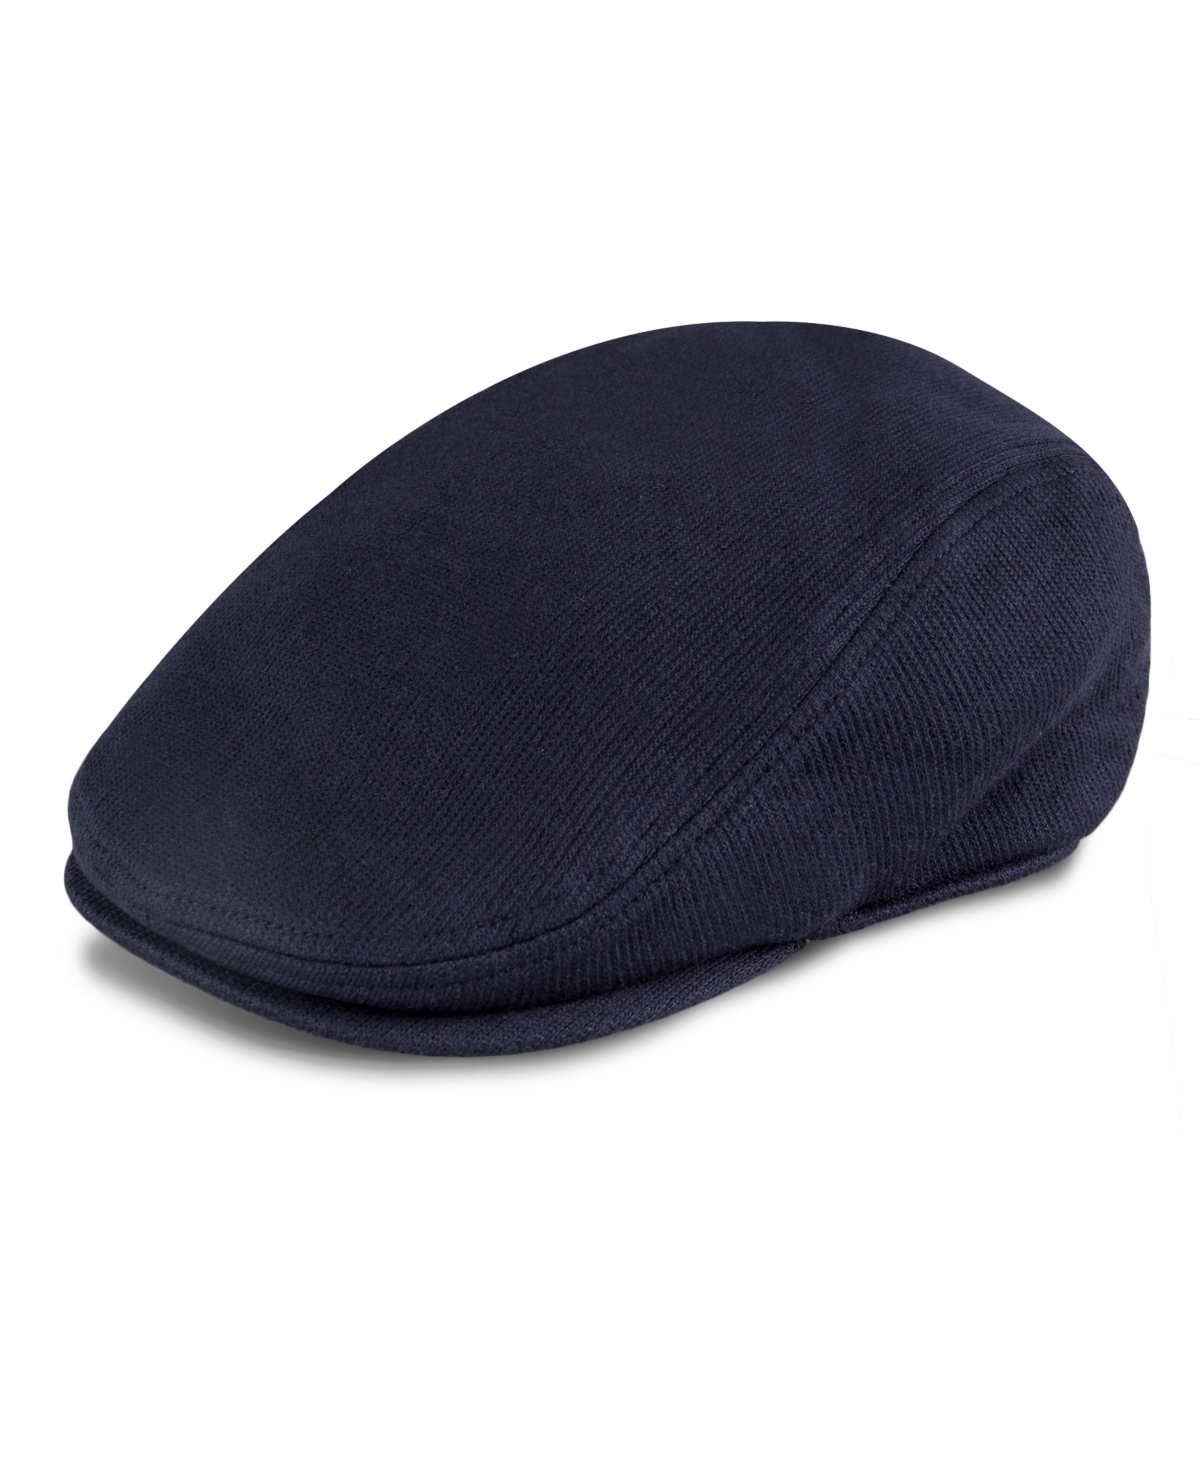 Levi's Men's Stretch Knit Flat Top Ivy Cap With Sherpa Fleece Lining In Navy